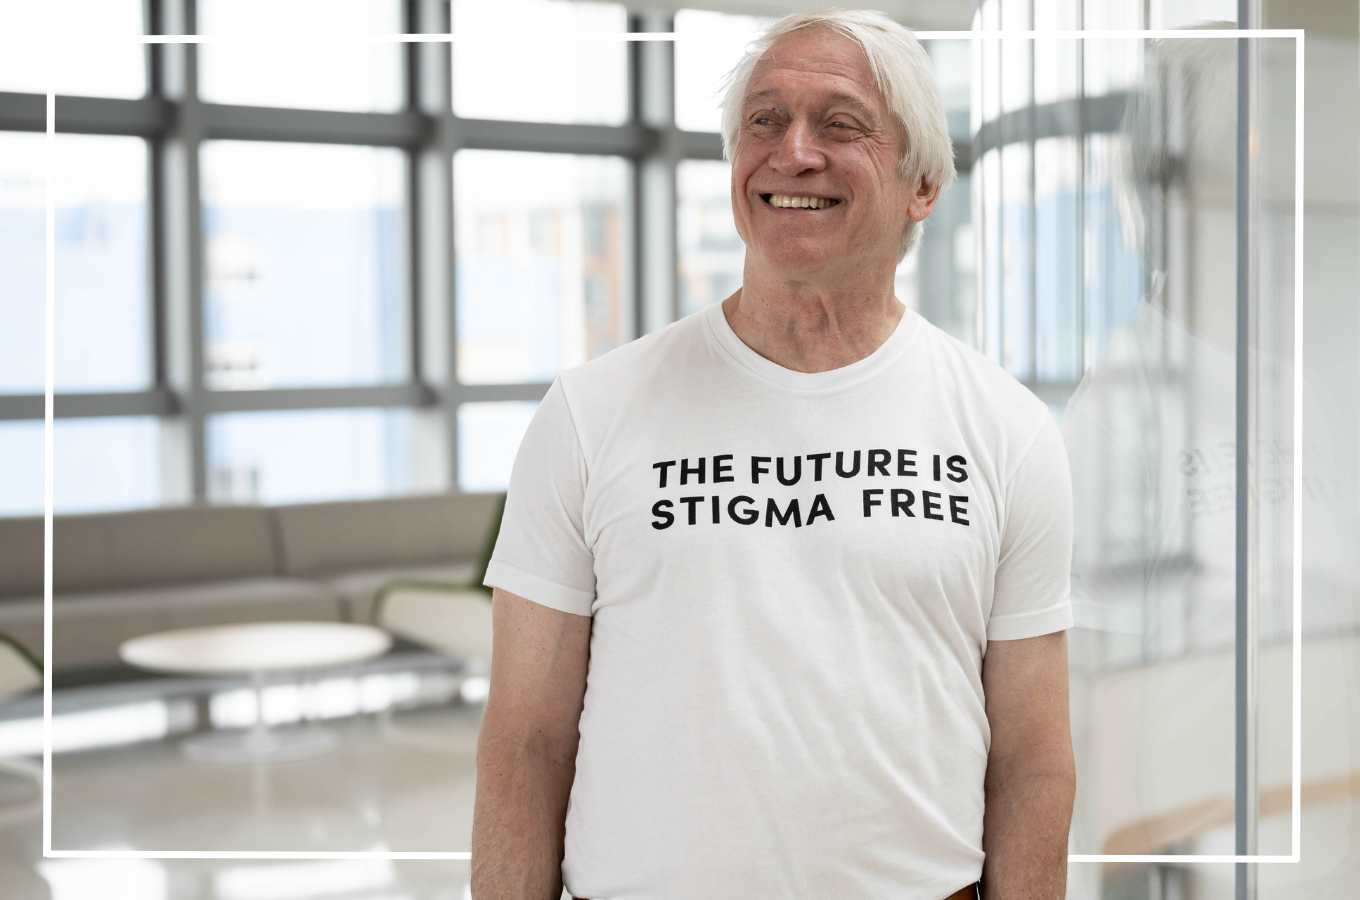 Man smiling wearing a white tshirt that reads "The Future is Stigma Free" courtesy of the UCSF Disability Awareness Campaign.